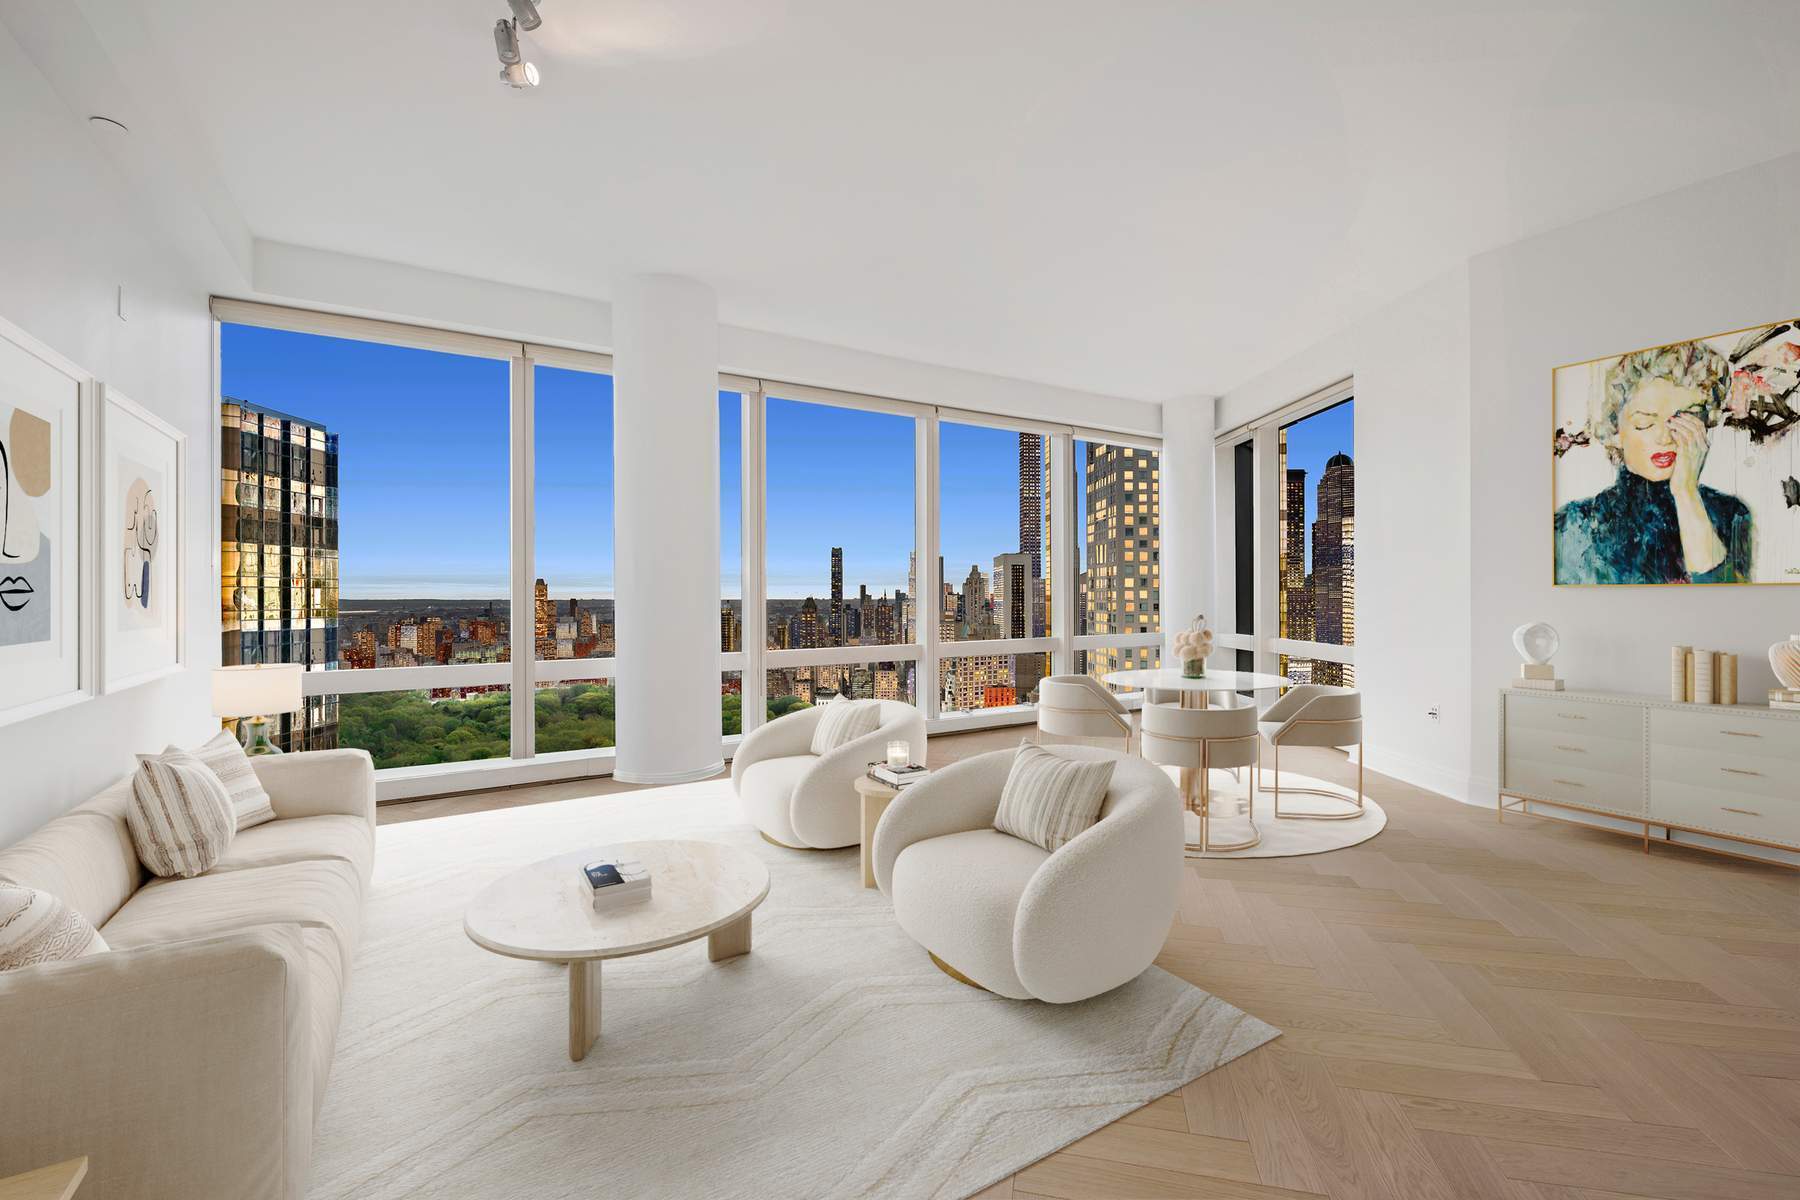 80 Columbus Circle 65D, Lincoln Square, Upper West Side, NYC - 3 Bedrooms  
3.5 Bathrooms  
5 Rooms - 